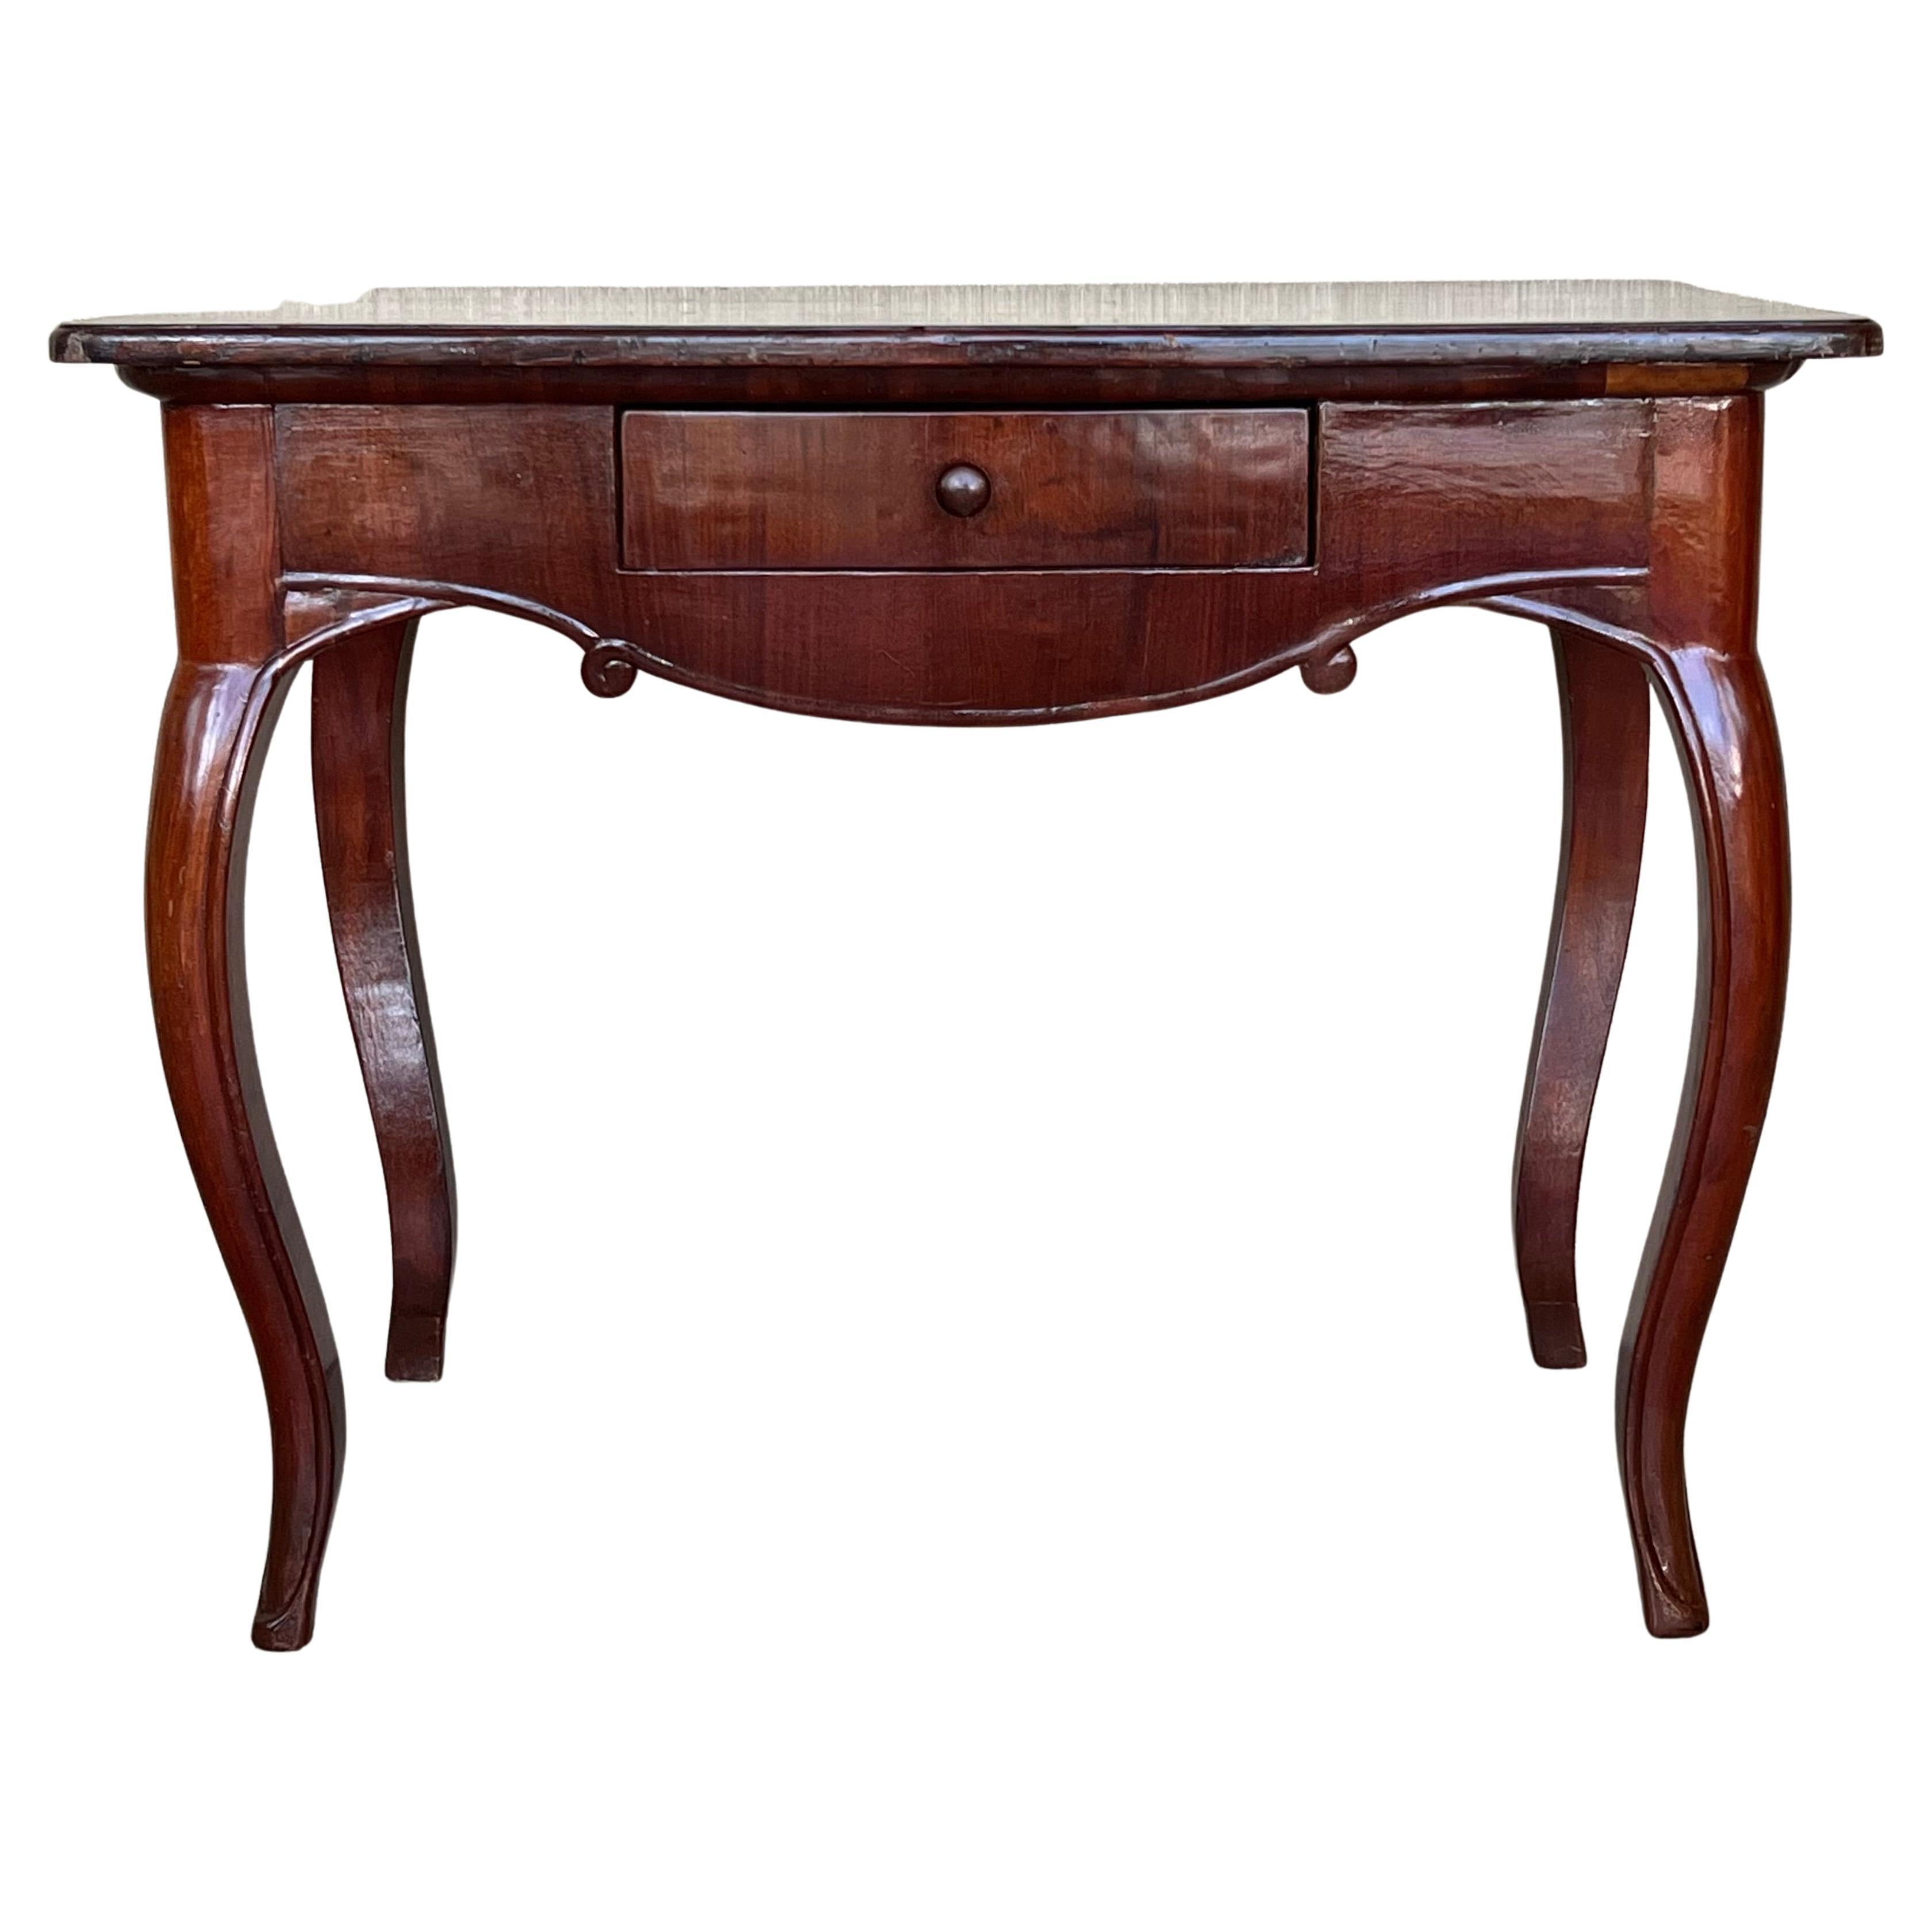 19th Spanish Walnut Drawer Side Table with Cabriole Legs